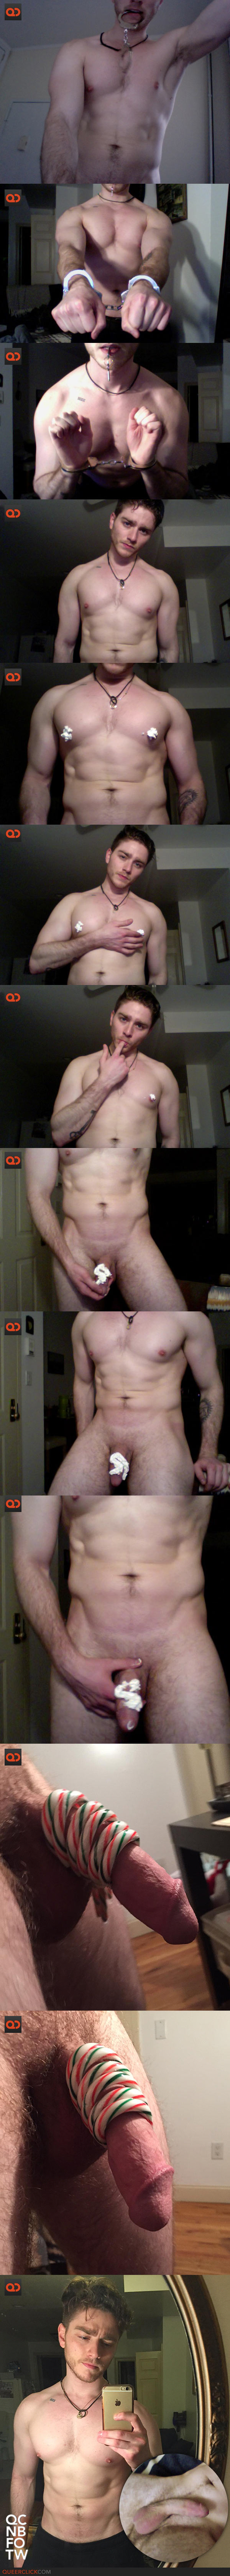 nude_bf_of_the_week-creamy_nipples-collage04